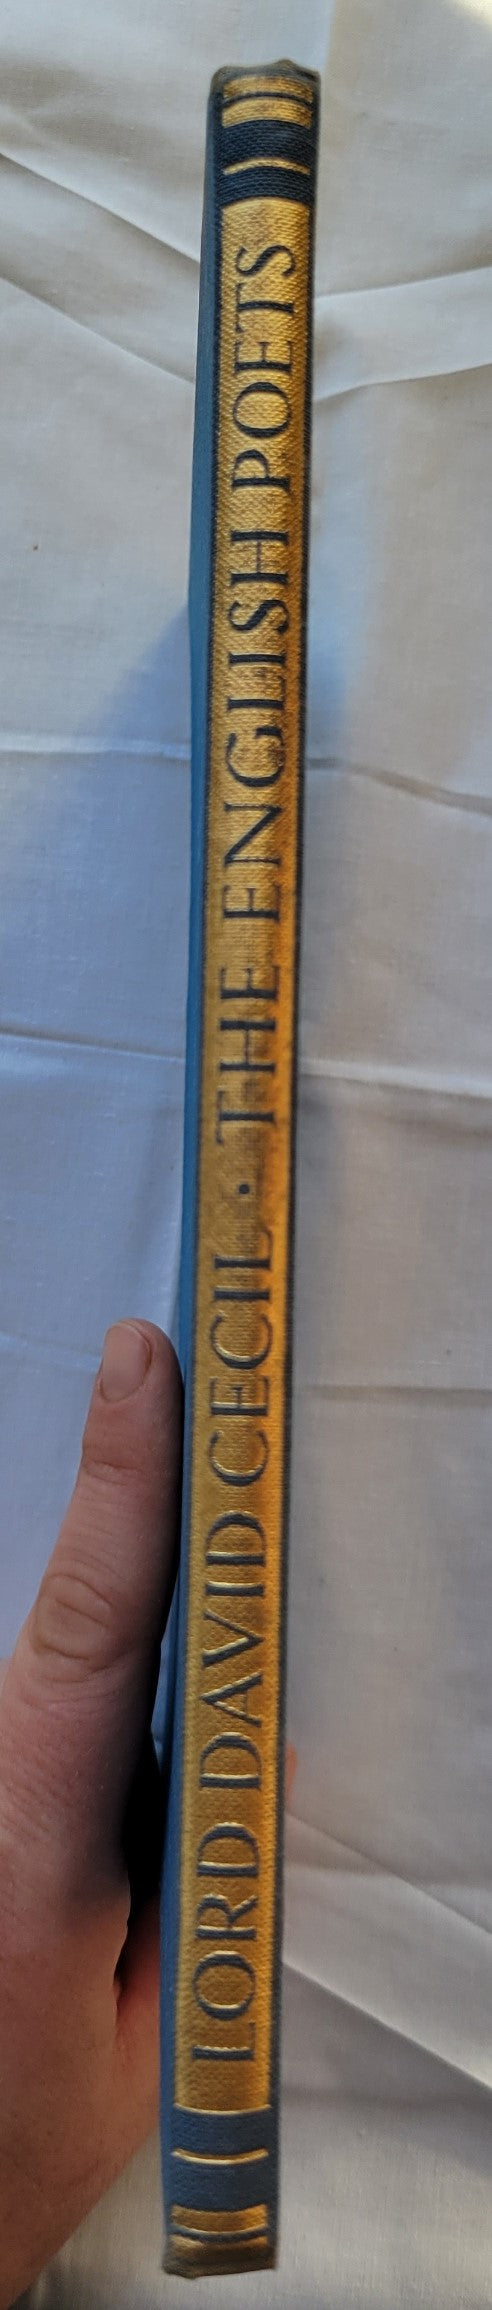 Vintage book for sale "The English Poets" by Lord David Cecil, published by Hastings House, 1940. Spine.